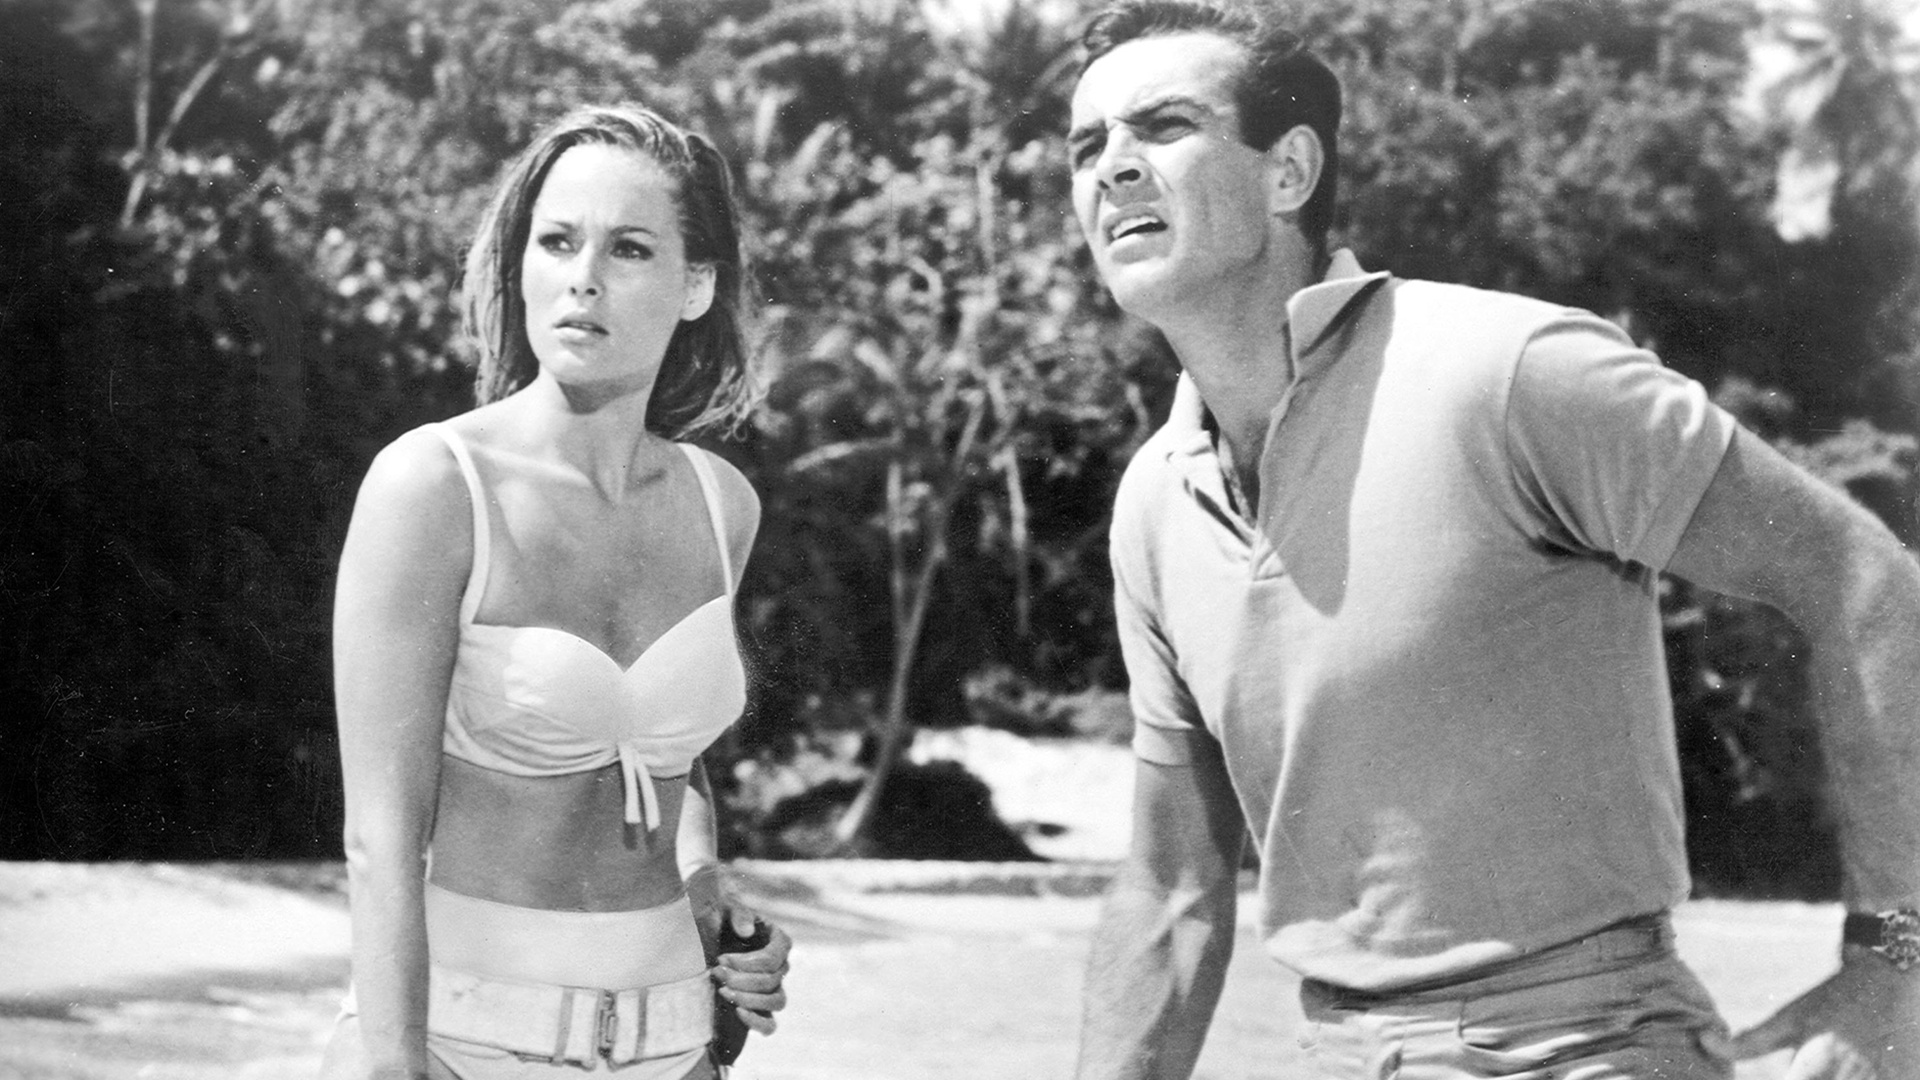 October 5, 1962: The First James Bond Film Premiered… and Bond Girls Captured the World’s Attention